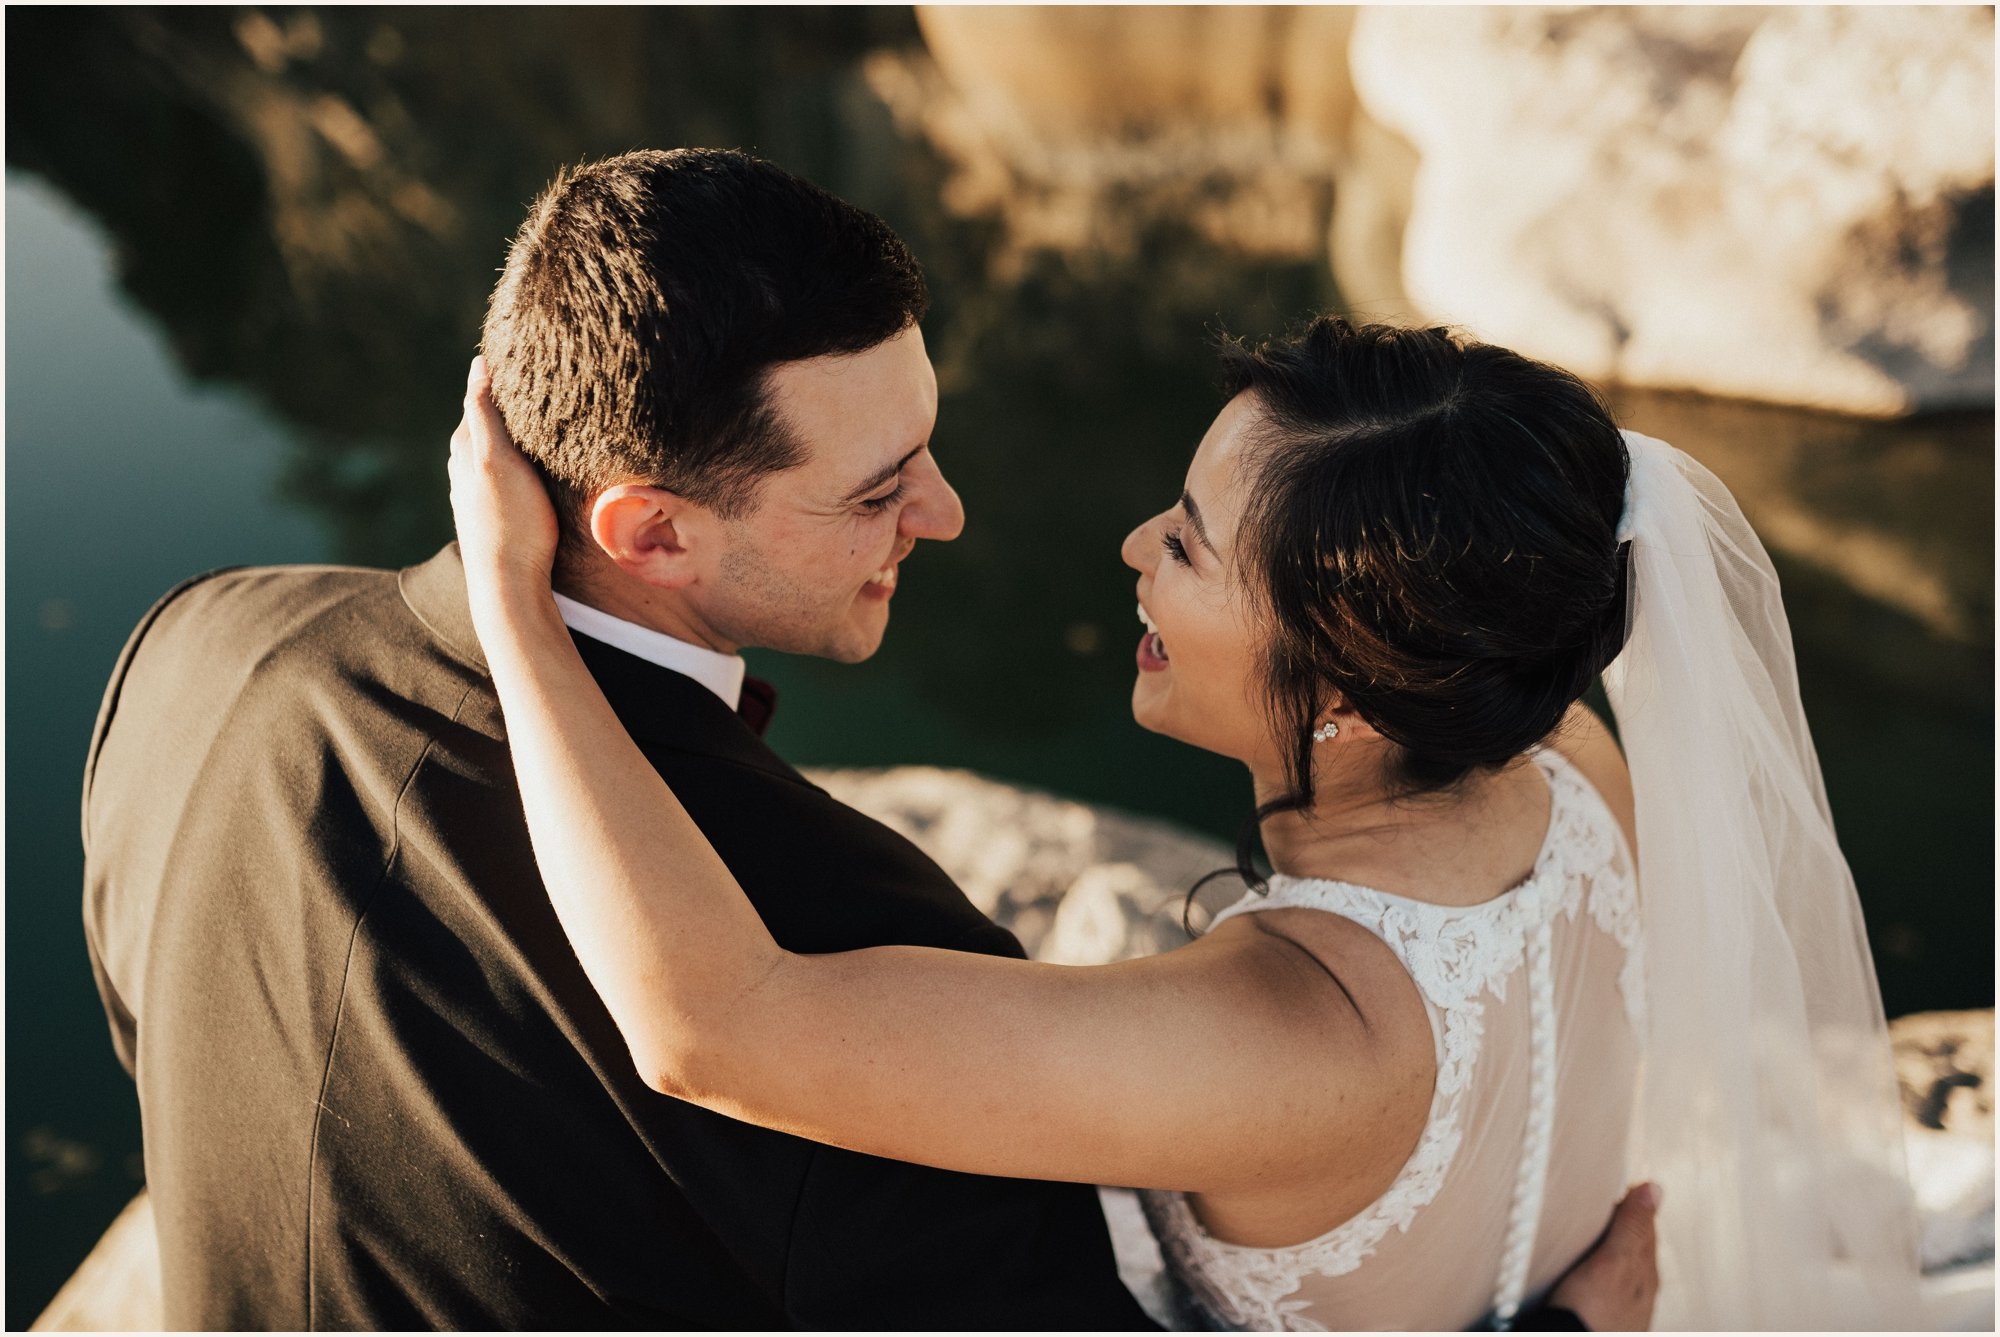 Reasons to Consider a First Look on Your Wedding Day | Wedding Planning Tips from Lauren Parr Photography | Austin Based Wedding Photographer